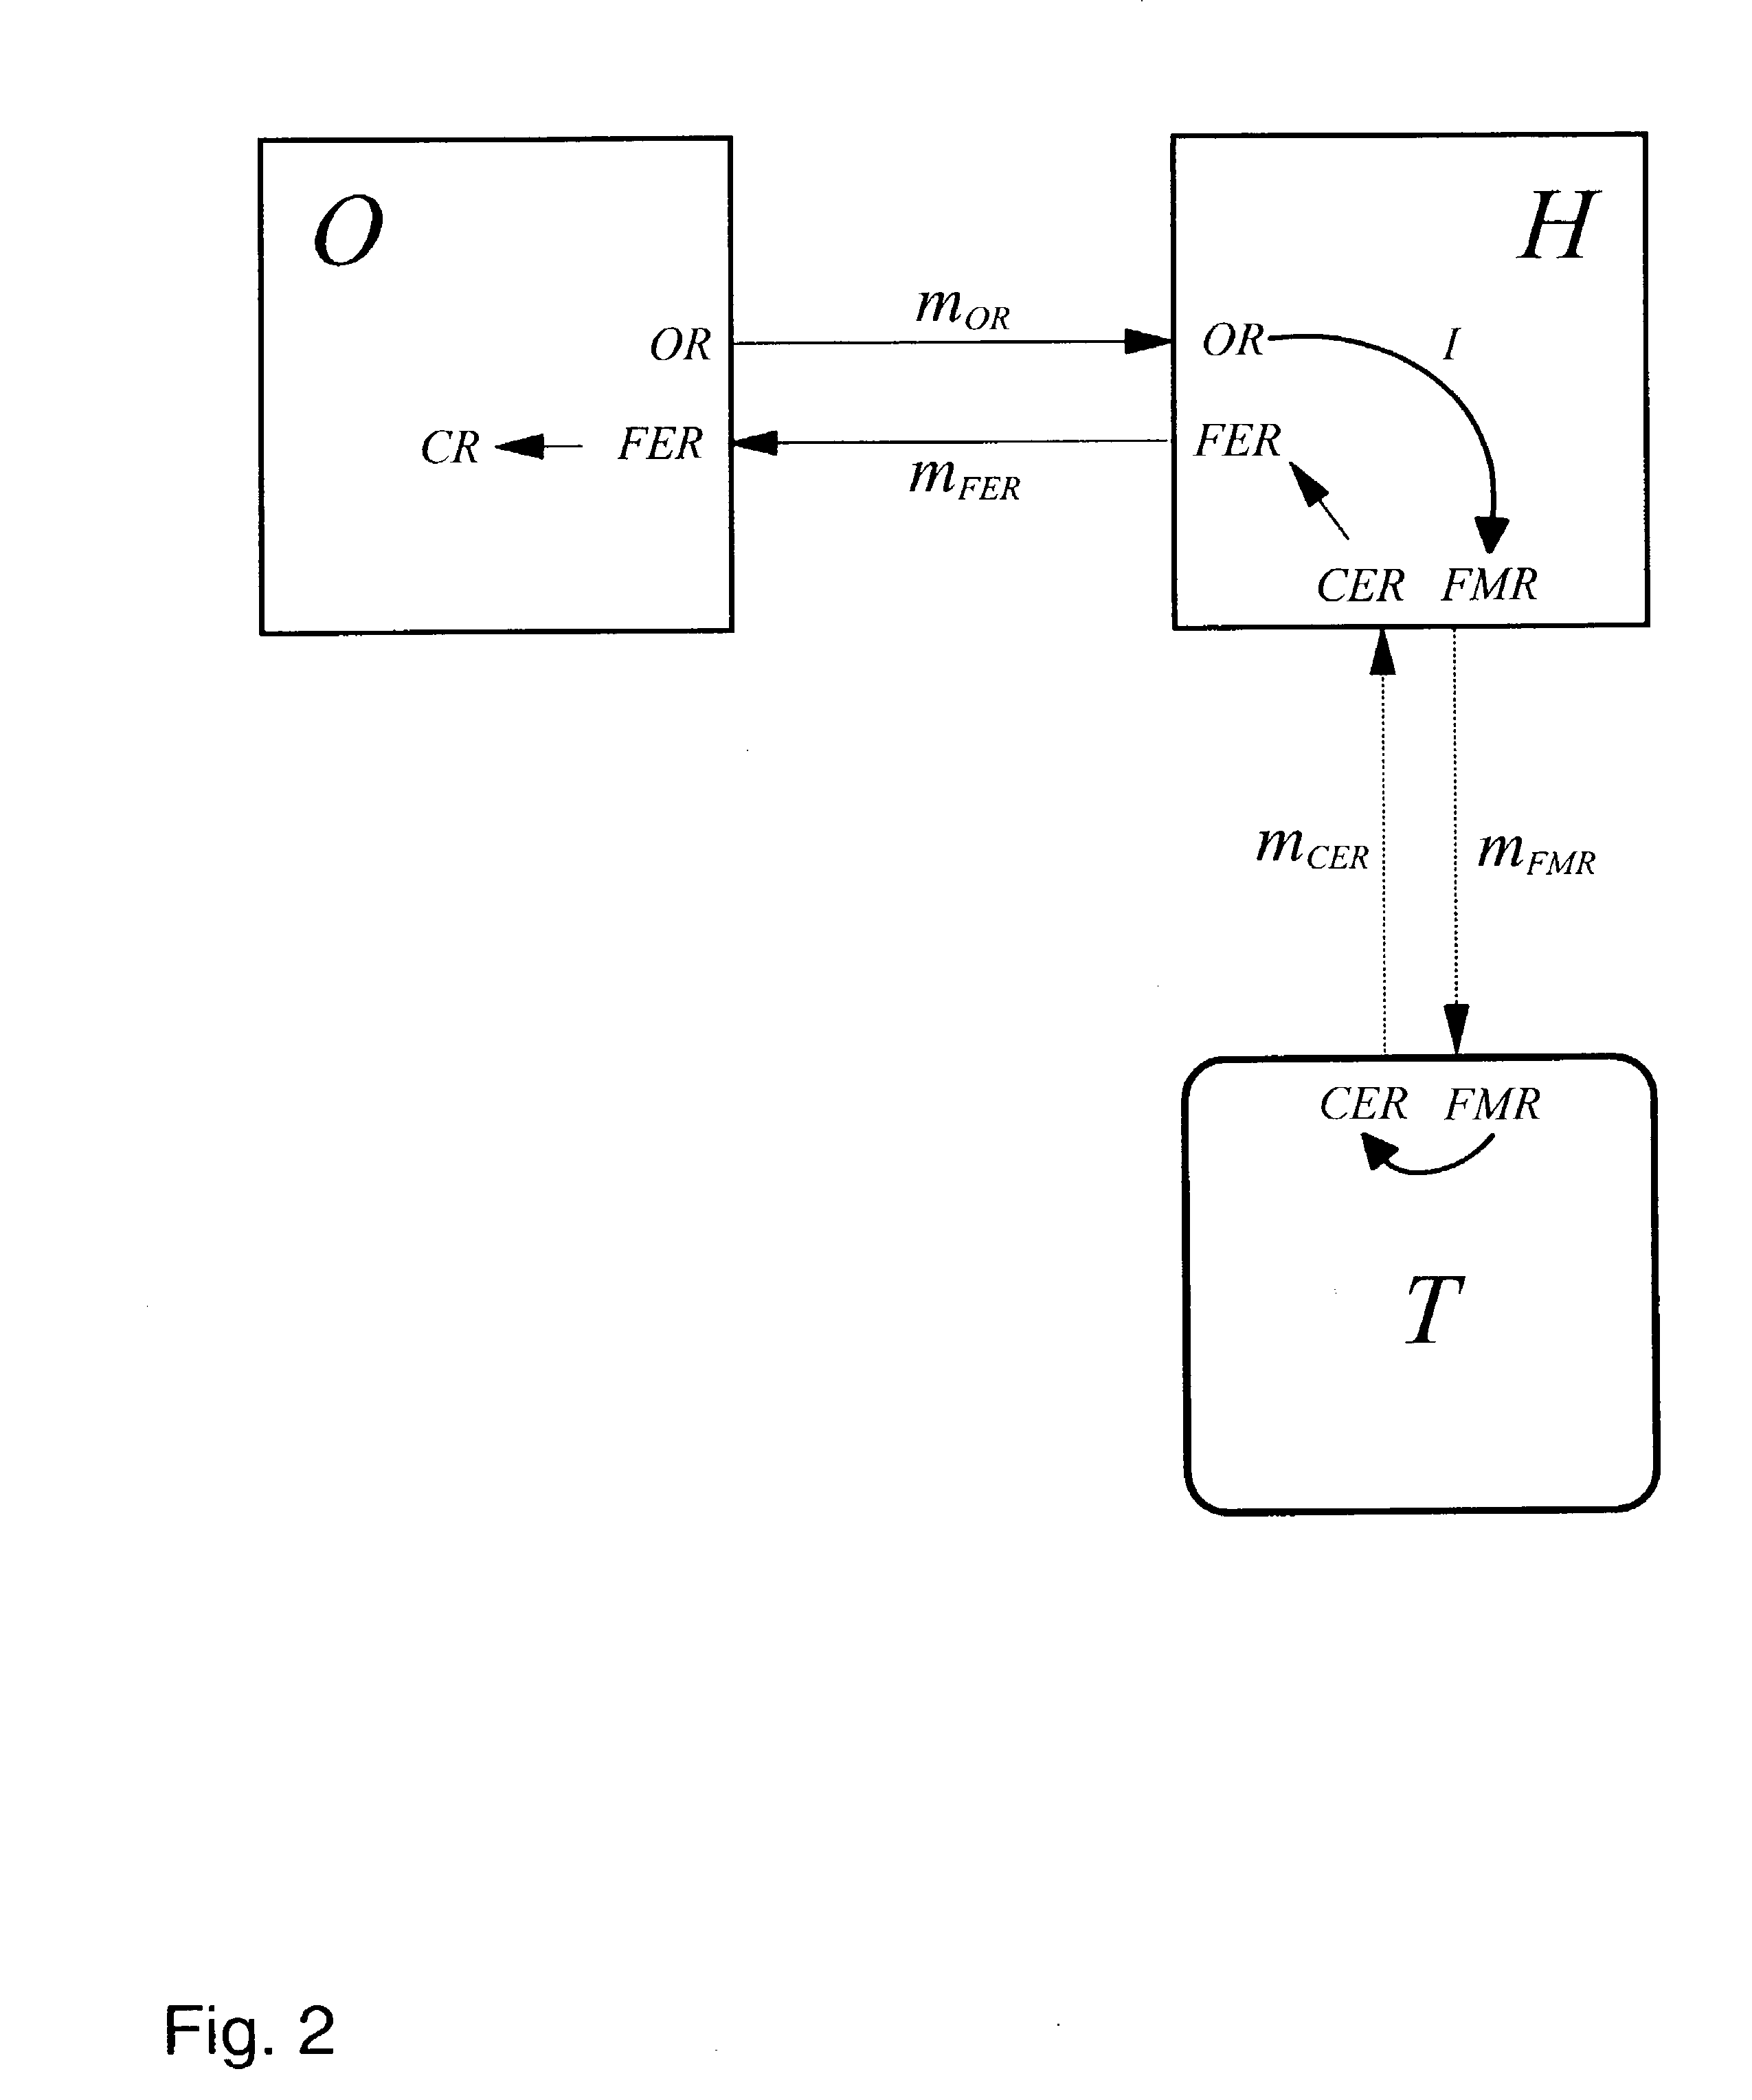 Method and system for processing a request of a customer